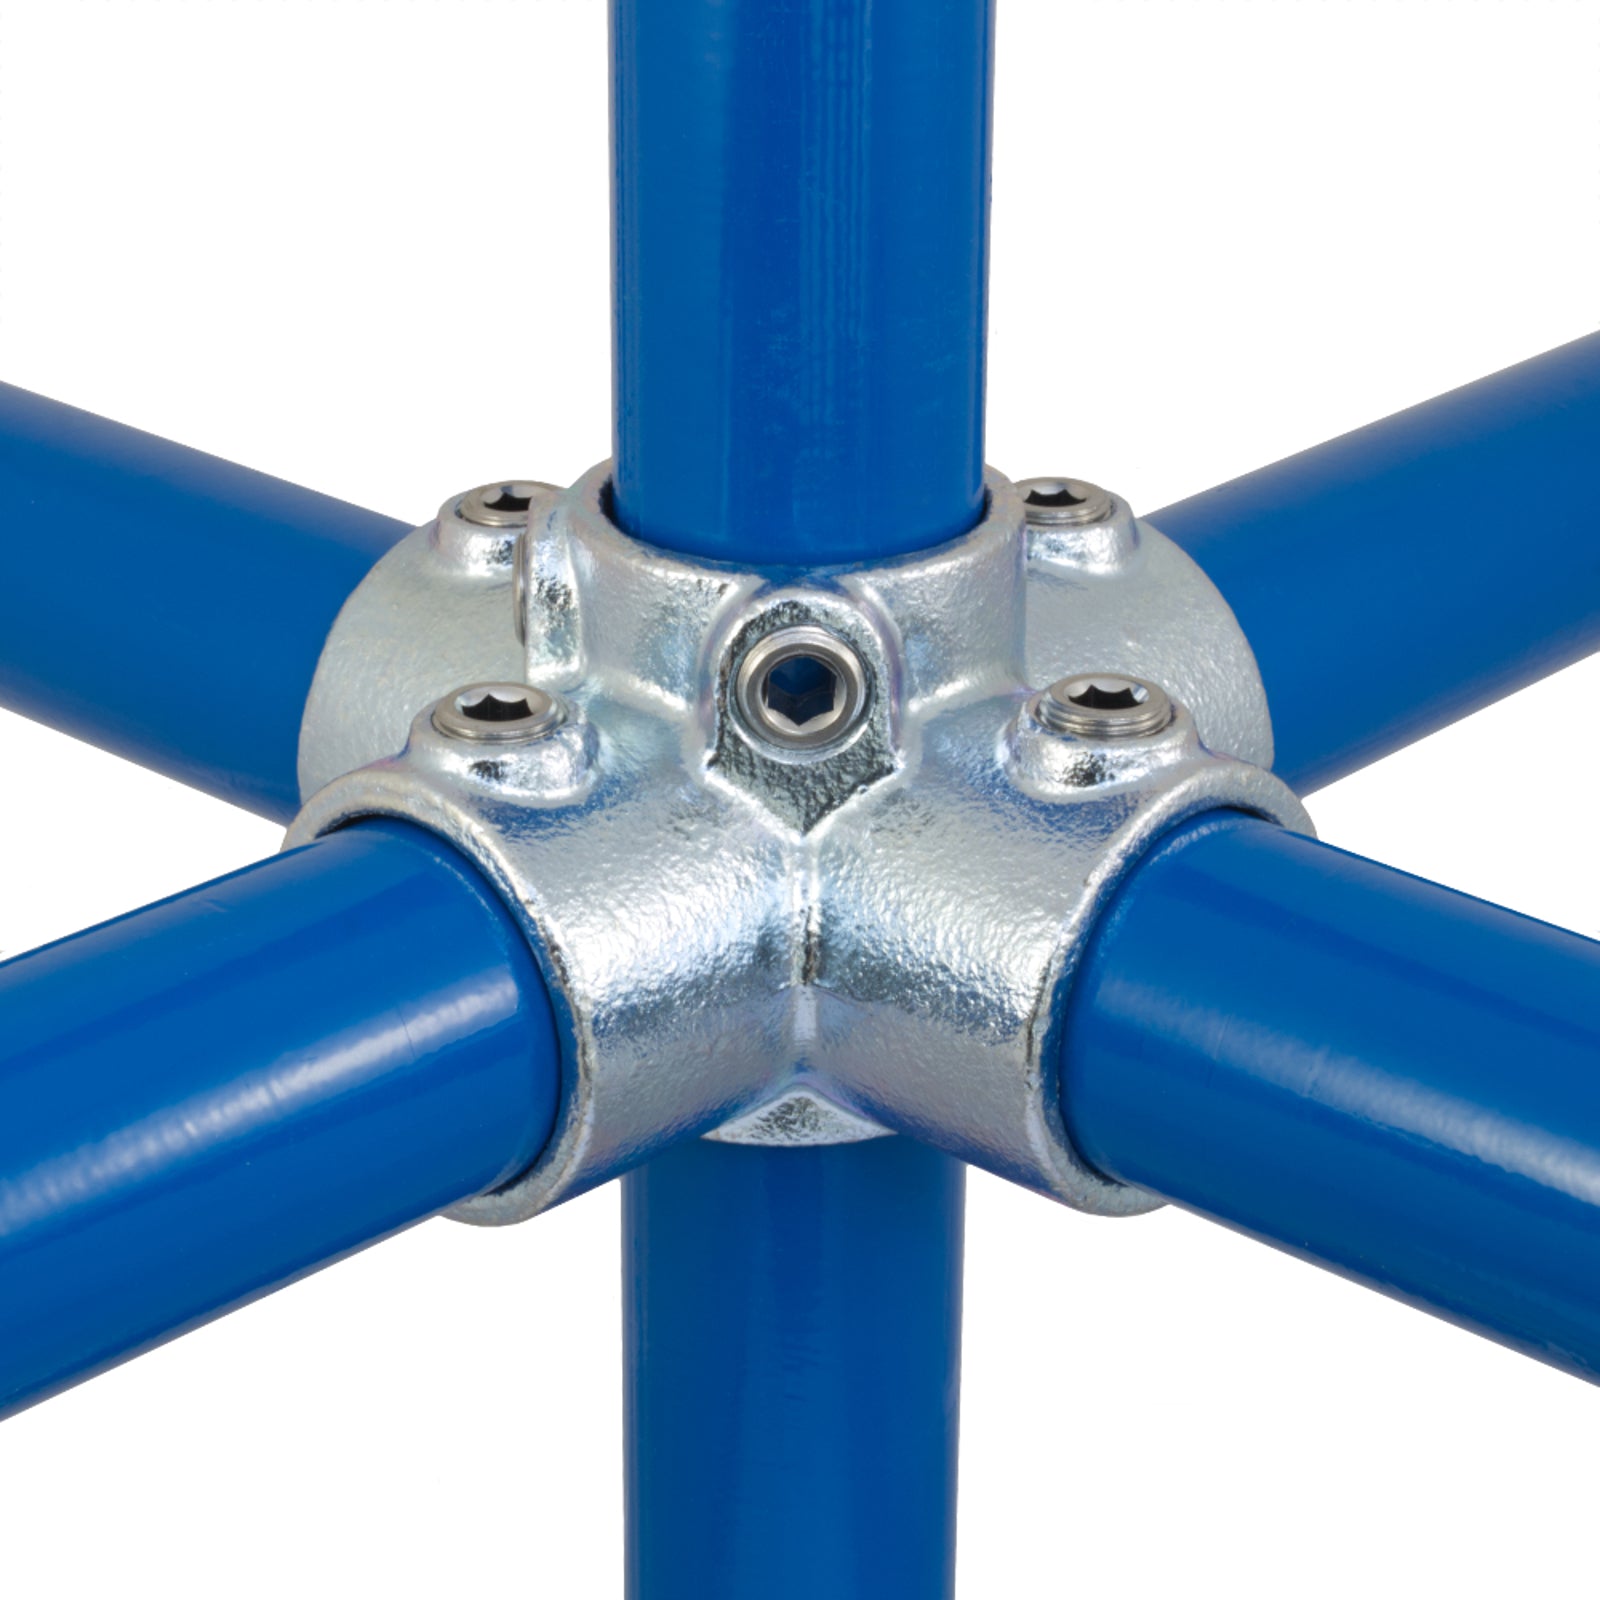 Four Way Centre Cross by Interclamp, Code 158. Shop rail, pipe and fence fittings online chain.com.au. Australia wide shipping.